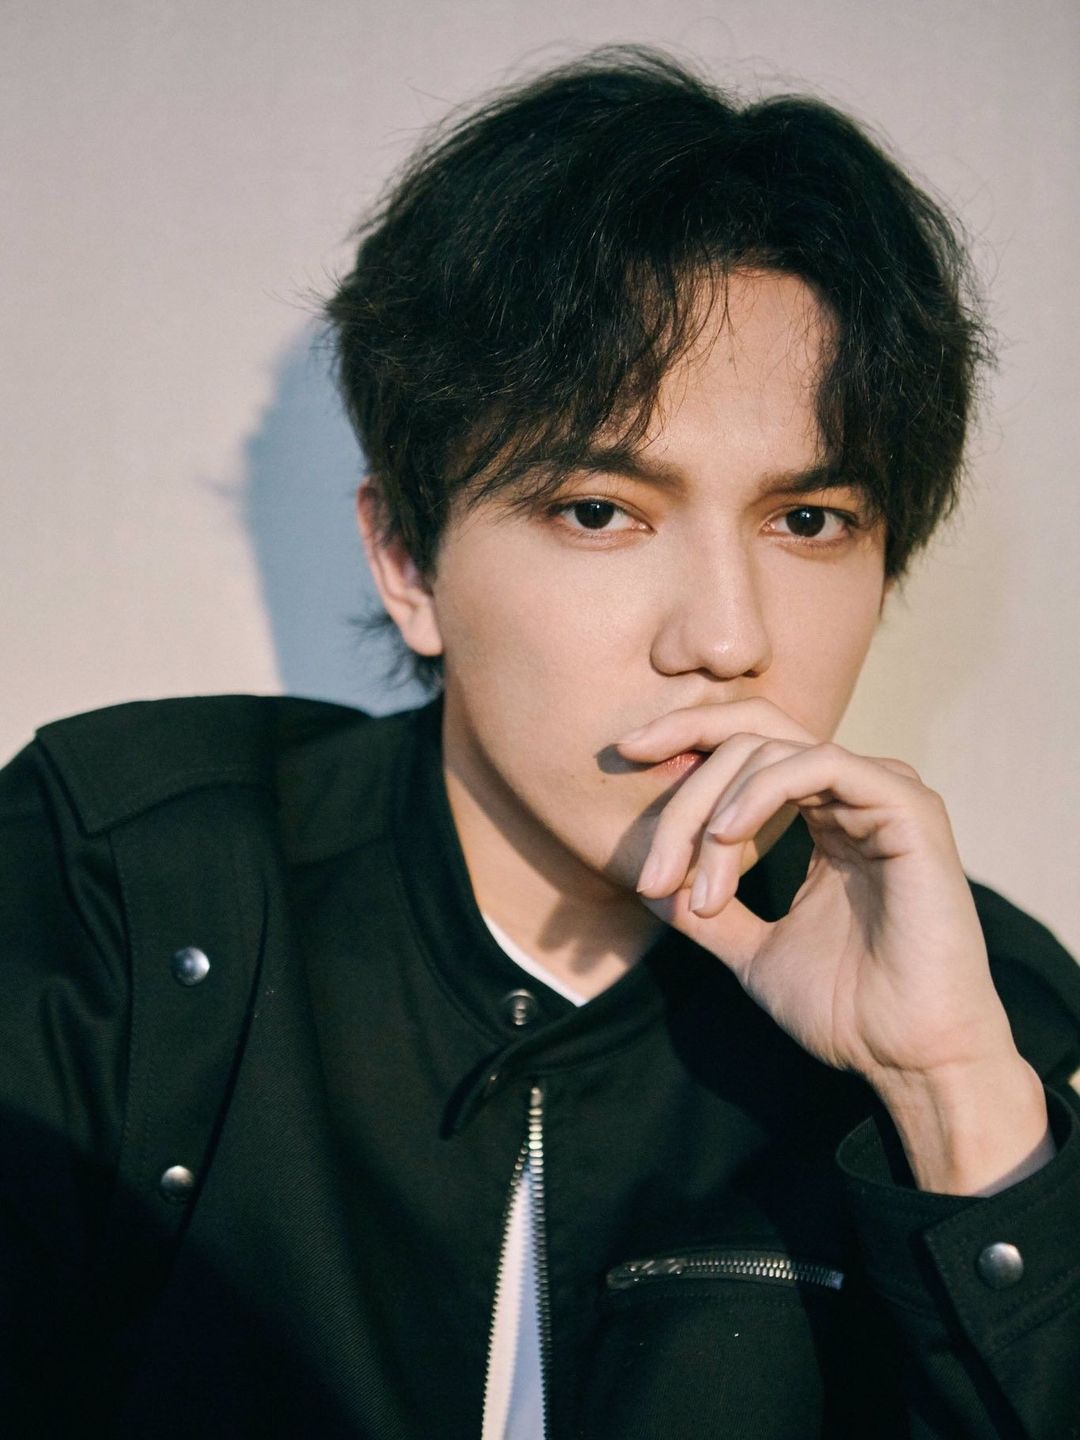 Dimash Kudaibergen who is his mother